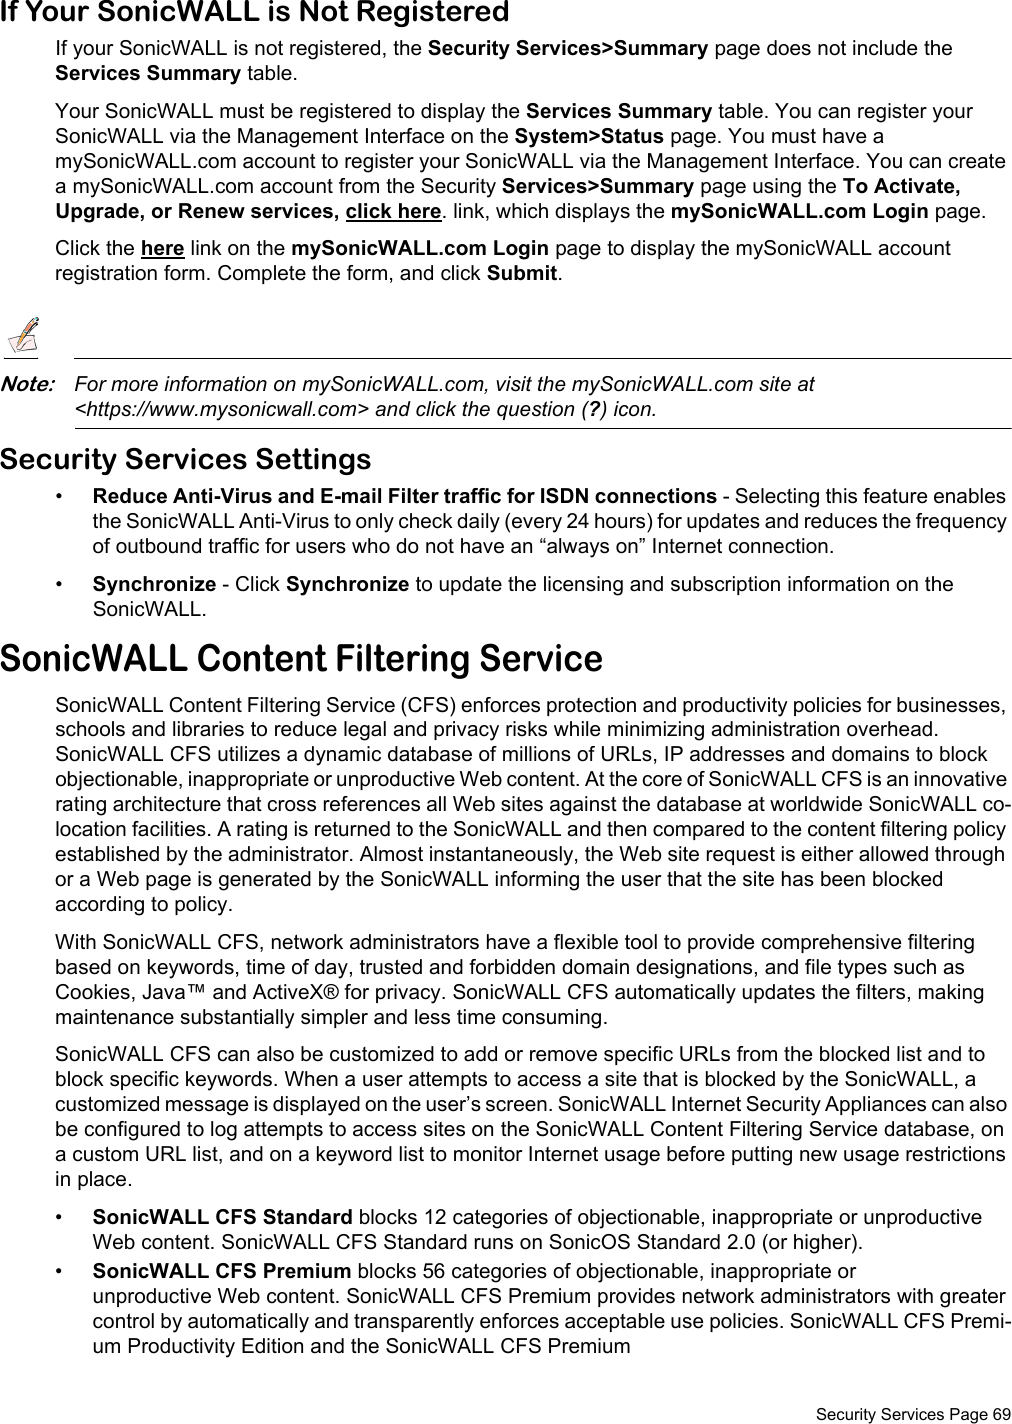  Security Services Page 69If Your SonicWALL is Not RegisteredIf your SonicWALL is not registered, the Security Services&gt;Summary page does not include the Services Summary table. Your SonicWALL must be registered to display the Services Summary table. You can register your SonicWALL via the Management Interface on the System&gt;Status page. You must have a mySonicWALL.com account to register your SonicWALL via the Management Interface. You can create a mySonicWALL.com account from the Security Services&gt;Summary page using the To Activate, Upgrade, or Renew services, click here. link, which displays the mySonicWALL.com Login page.Click the here link on the mySonicWALL.com Login page to display the mySonicWALL account registration form. Complete the form, and click Submit. Note:For more information on mySonicWALL.com, visit the mySonicWALL.com site at &lt;https://www.mysonicwall.com&gt; and click the question (?) icon.Security Services Settings•Reduce Anti-Virus and E-mail Filter traffic for ISDN connections - Selecting this feature enables the SonicWALL Anti-Virus to only check daily (every 24 hours) for updates and reduces the frequency of outbound traffic for users who do not have an “always on” Internet connection.•Synchronize - Click Synchronize to update the licensing and subscription information on the SonicWALL. SonicWALL Content Filtering ServiceSonicWALL Content Filtering Service (CFS) enforces protection and productivity policies for businesses, schools and libraries to reduce legal and privacy risks while minimizing administration overhead. SonicWALL CFS utilizes a dynamic database of millions of URLs, IP addresses and domains to block objectionable, inappropriate or unproductive Web content. At the core of SonicWALL CFS is an innovative rating architecture that cross references all Web sites against the database at worldwide SonicWALL co-location facilities. A rating is returned to the SonicWALL and then compared to the content filtering policy established by the administrator. Almost instantaneously, the Web site request is either allowed through or a Web page is generated by the SonicWALL informing the user that the site has been blocked according to policy.With SonicWALL CFS, network administrators have a flexible tool to provide comprehensive filtering based on keywords, time of day, trusted and forbidden domain designations, and file types such as Cookies, Java™ and ActiveX® for privacy. SonicWALL CFS automatically updates the filters, making maintenance substantially simpler and less time consuming.SonicWALL CFS can also be customized to add or remove specific URLs from the blocked list and to block specific keywords. When a user attempts to access a site that is blocked by the SonicWALL, a customized message is displayed on the user’s screen. SonicWALL Internet Security Appliances can also be configured to log attempts to access sites on the SonicWALL Content Filtering Service database, on a custom URL list, and on a keyword list to monitor Internet usage before putting new usage restrictions in place.•SonicWALL CFS Standard blocks 12 categories of objectionable, inappropriate or unproductive Web content. SonicWALL CFS Standard runs on SonicOS Standard 2.0 (or higher).•SonicWALL CFS Premium blocks 56 categories of objectionable, inappropriate or unproductive Web content. SonicWALL CFS Premium provides network administrators with greater control by automatically and transparently enforces acceptable use policies. SonicWALL CFS Premi-um Productivity Edition and the SonicWALL CFS Premium 